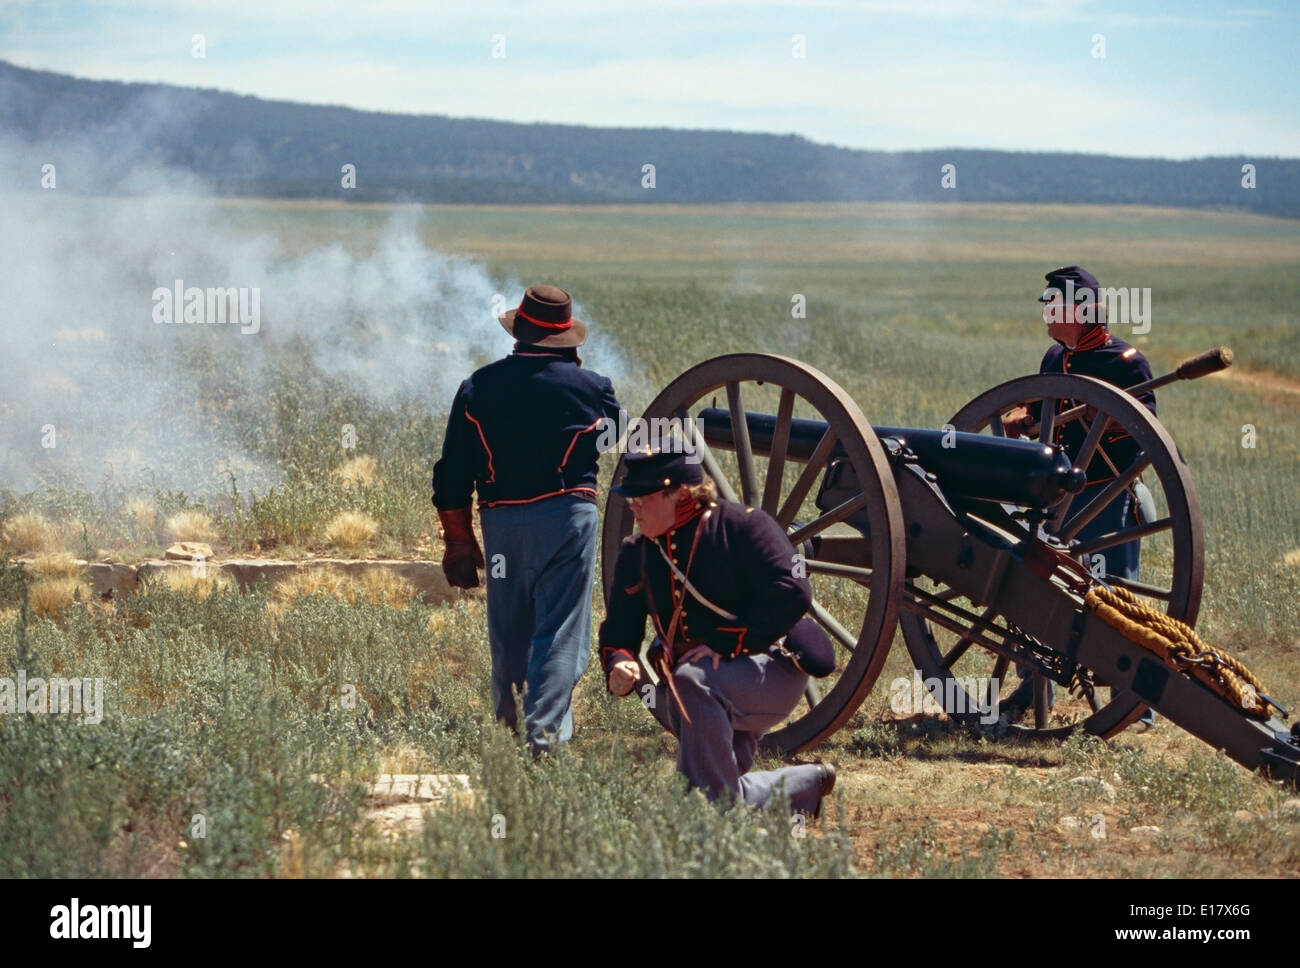 Firing of Civil War Era cannon by soldier reenactors, Fort Union National Monument, New Mexico USA Stock Photo